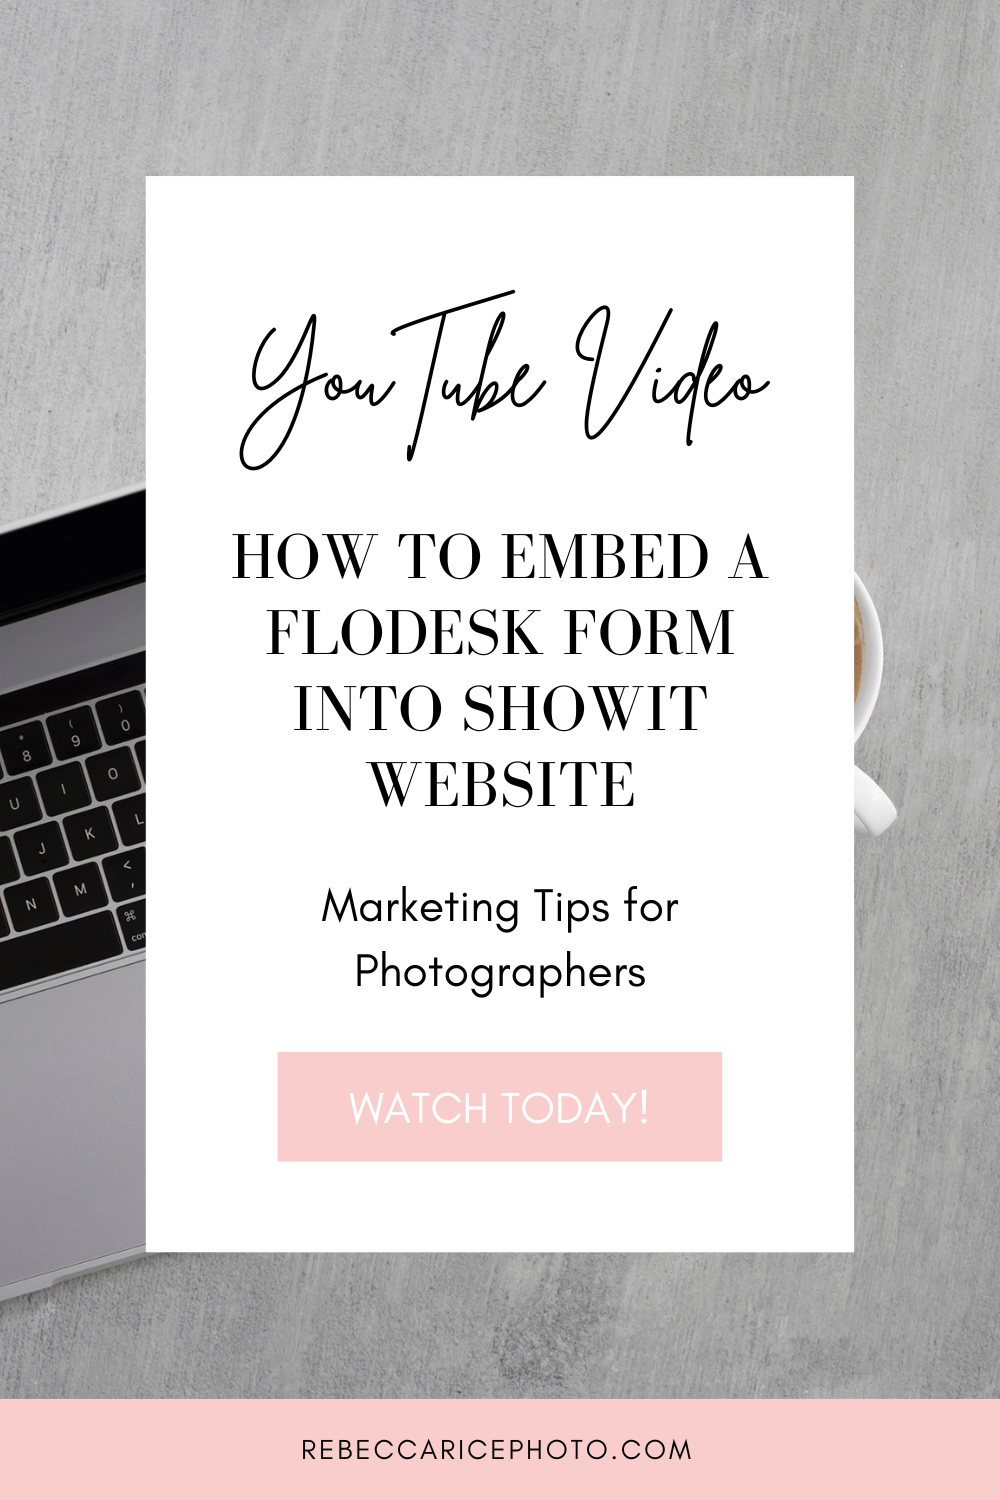 How to Embed a Flodesk Form into Showit Website | How to Grow Your Email List